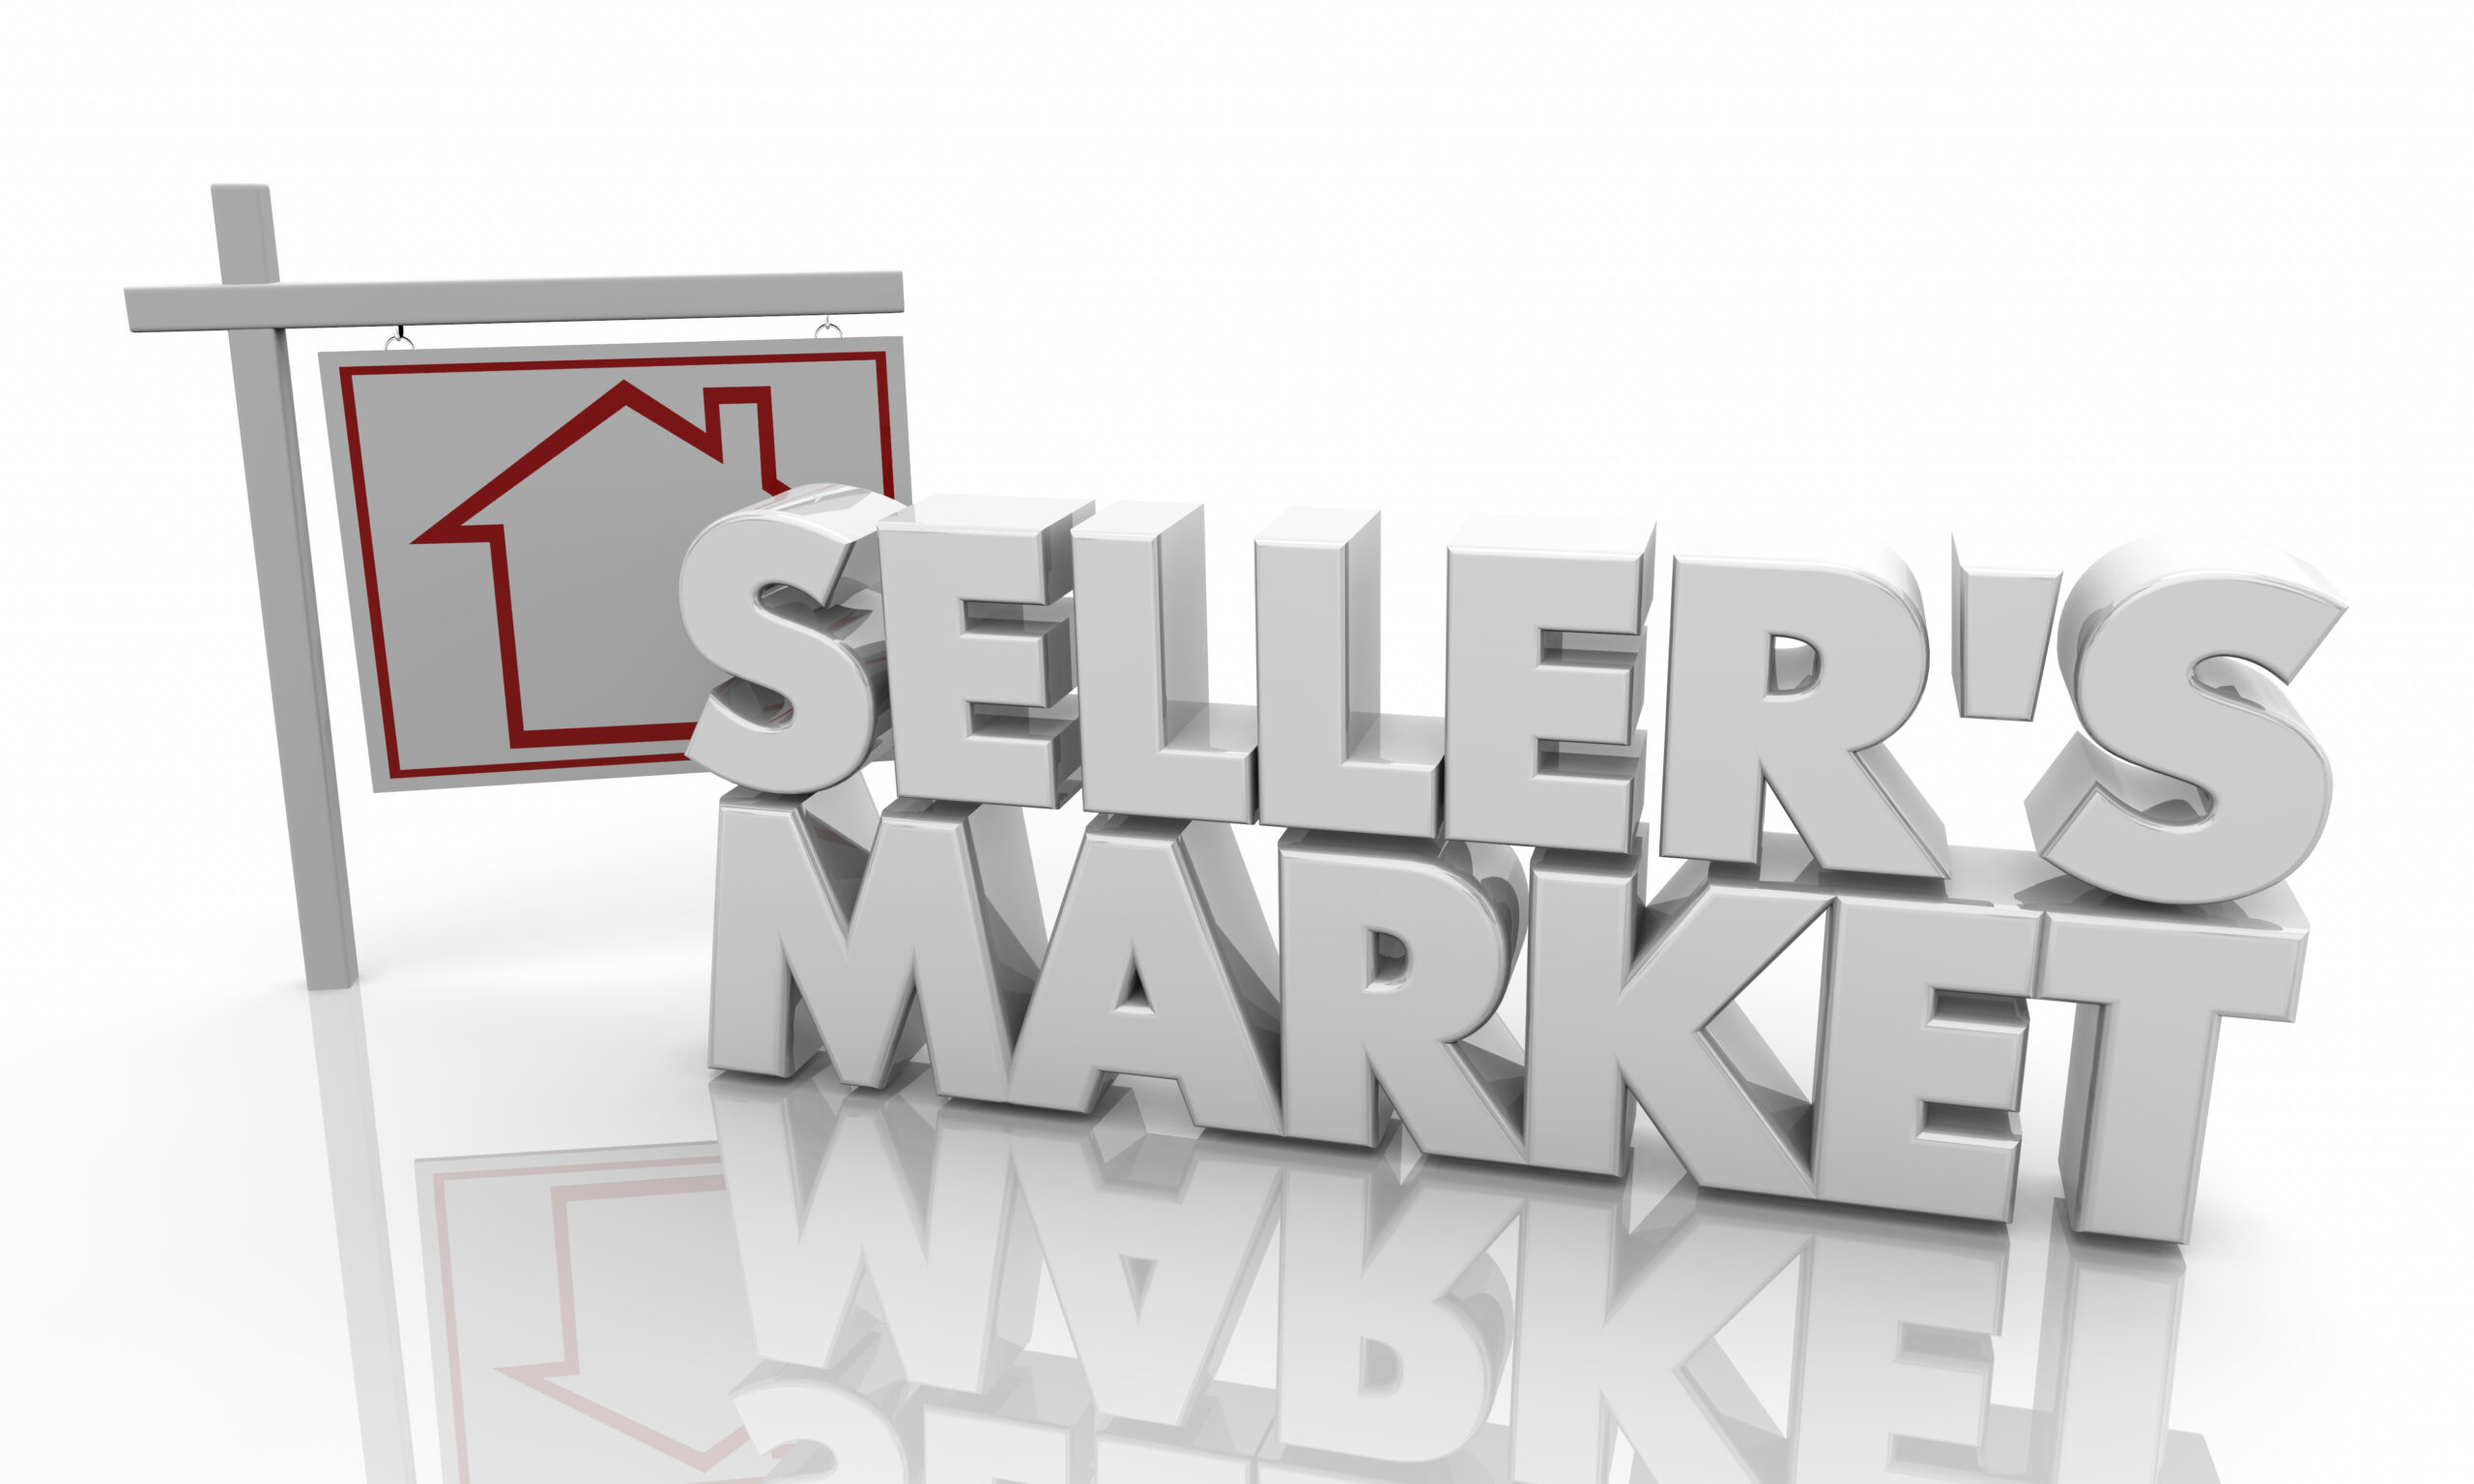 Featured image for “It’s a sellers market”